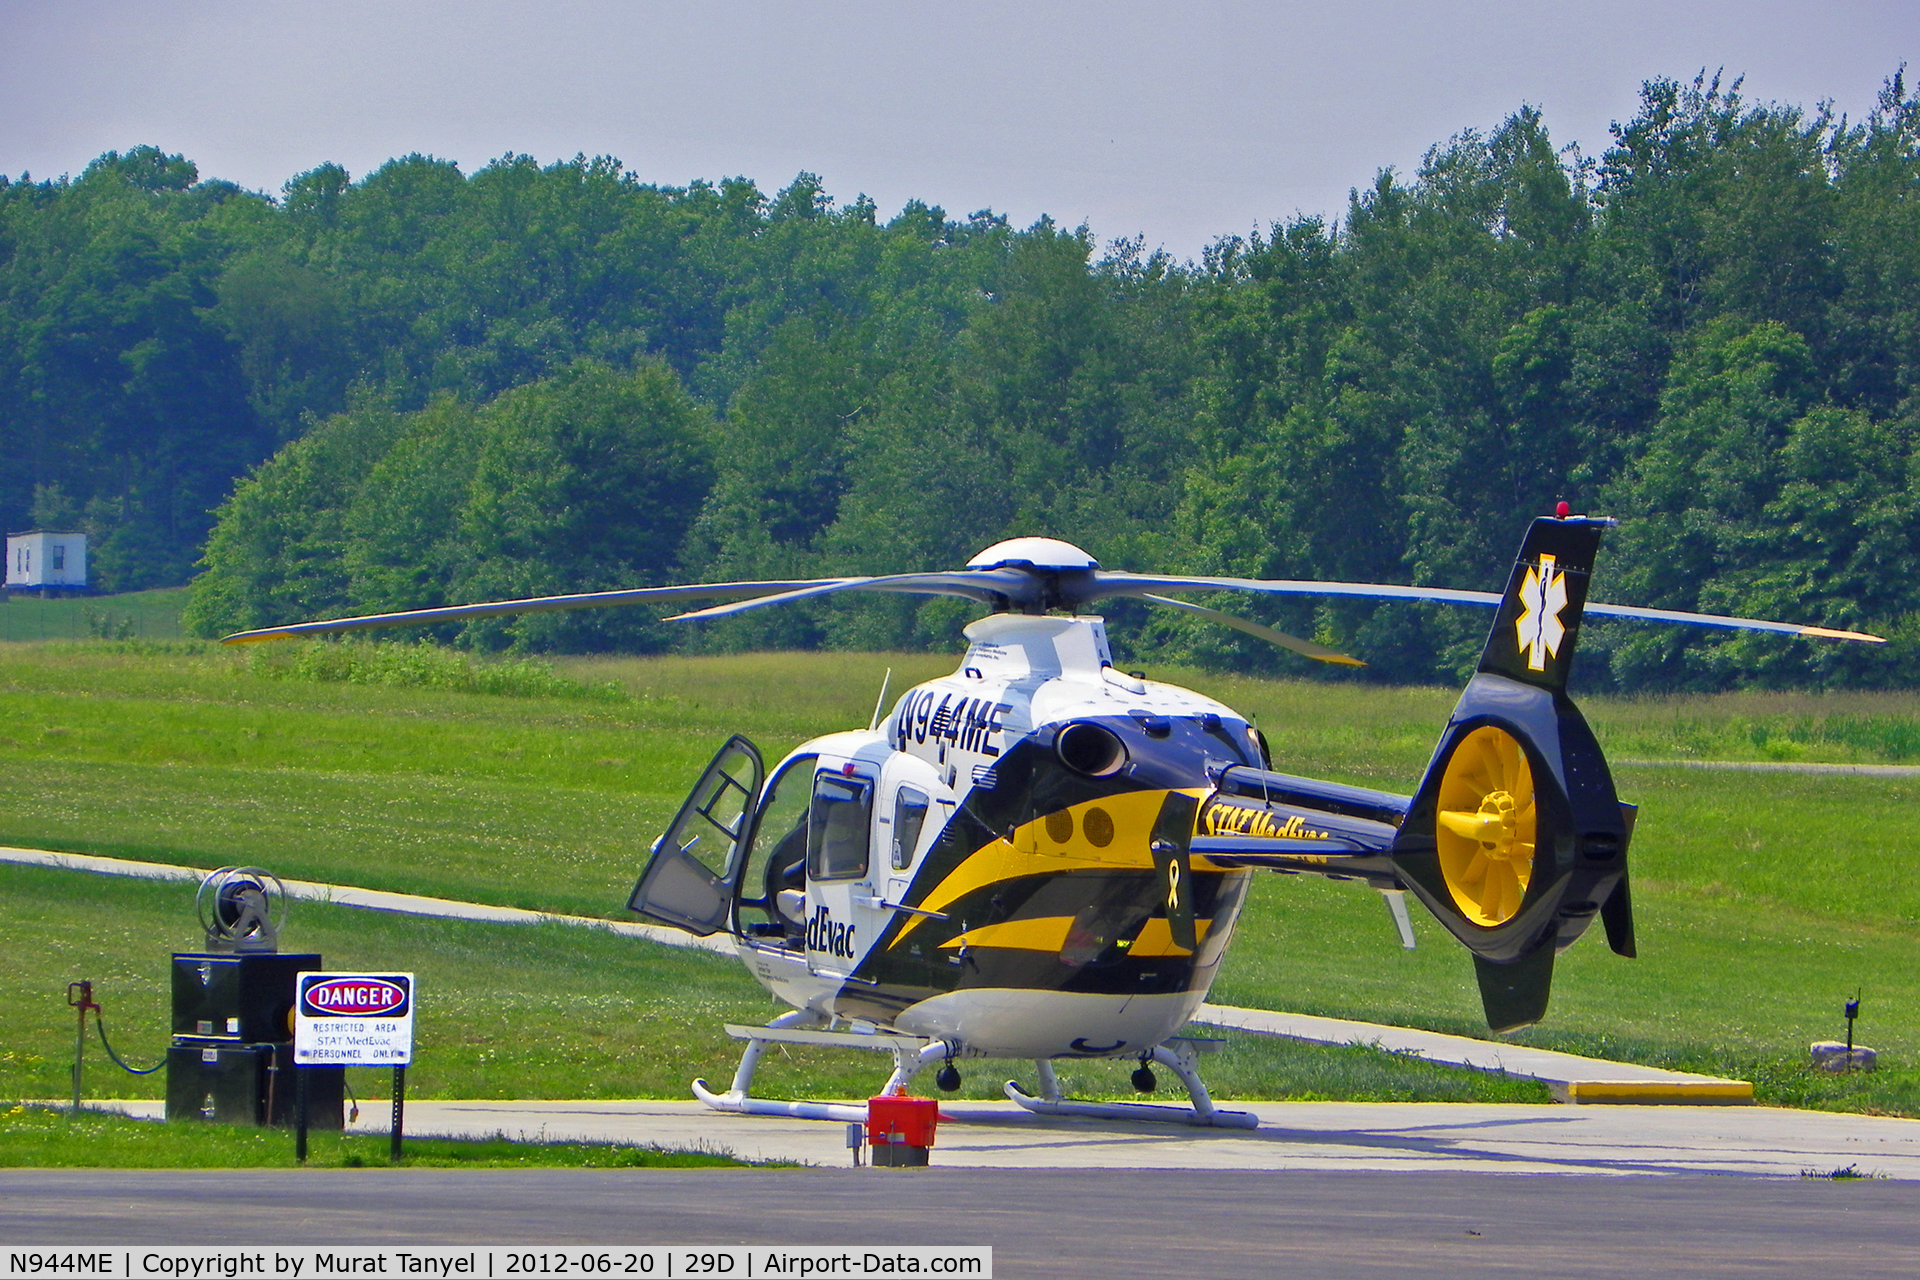 N944ME, 2010 Eurocopter EC-135T-2+ C/N 0945, Parked at Grove City Regional Airport